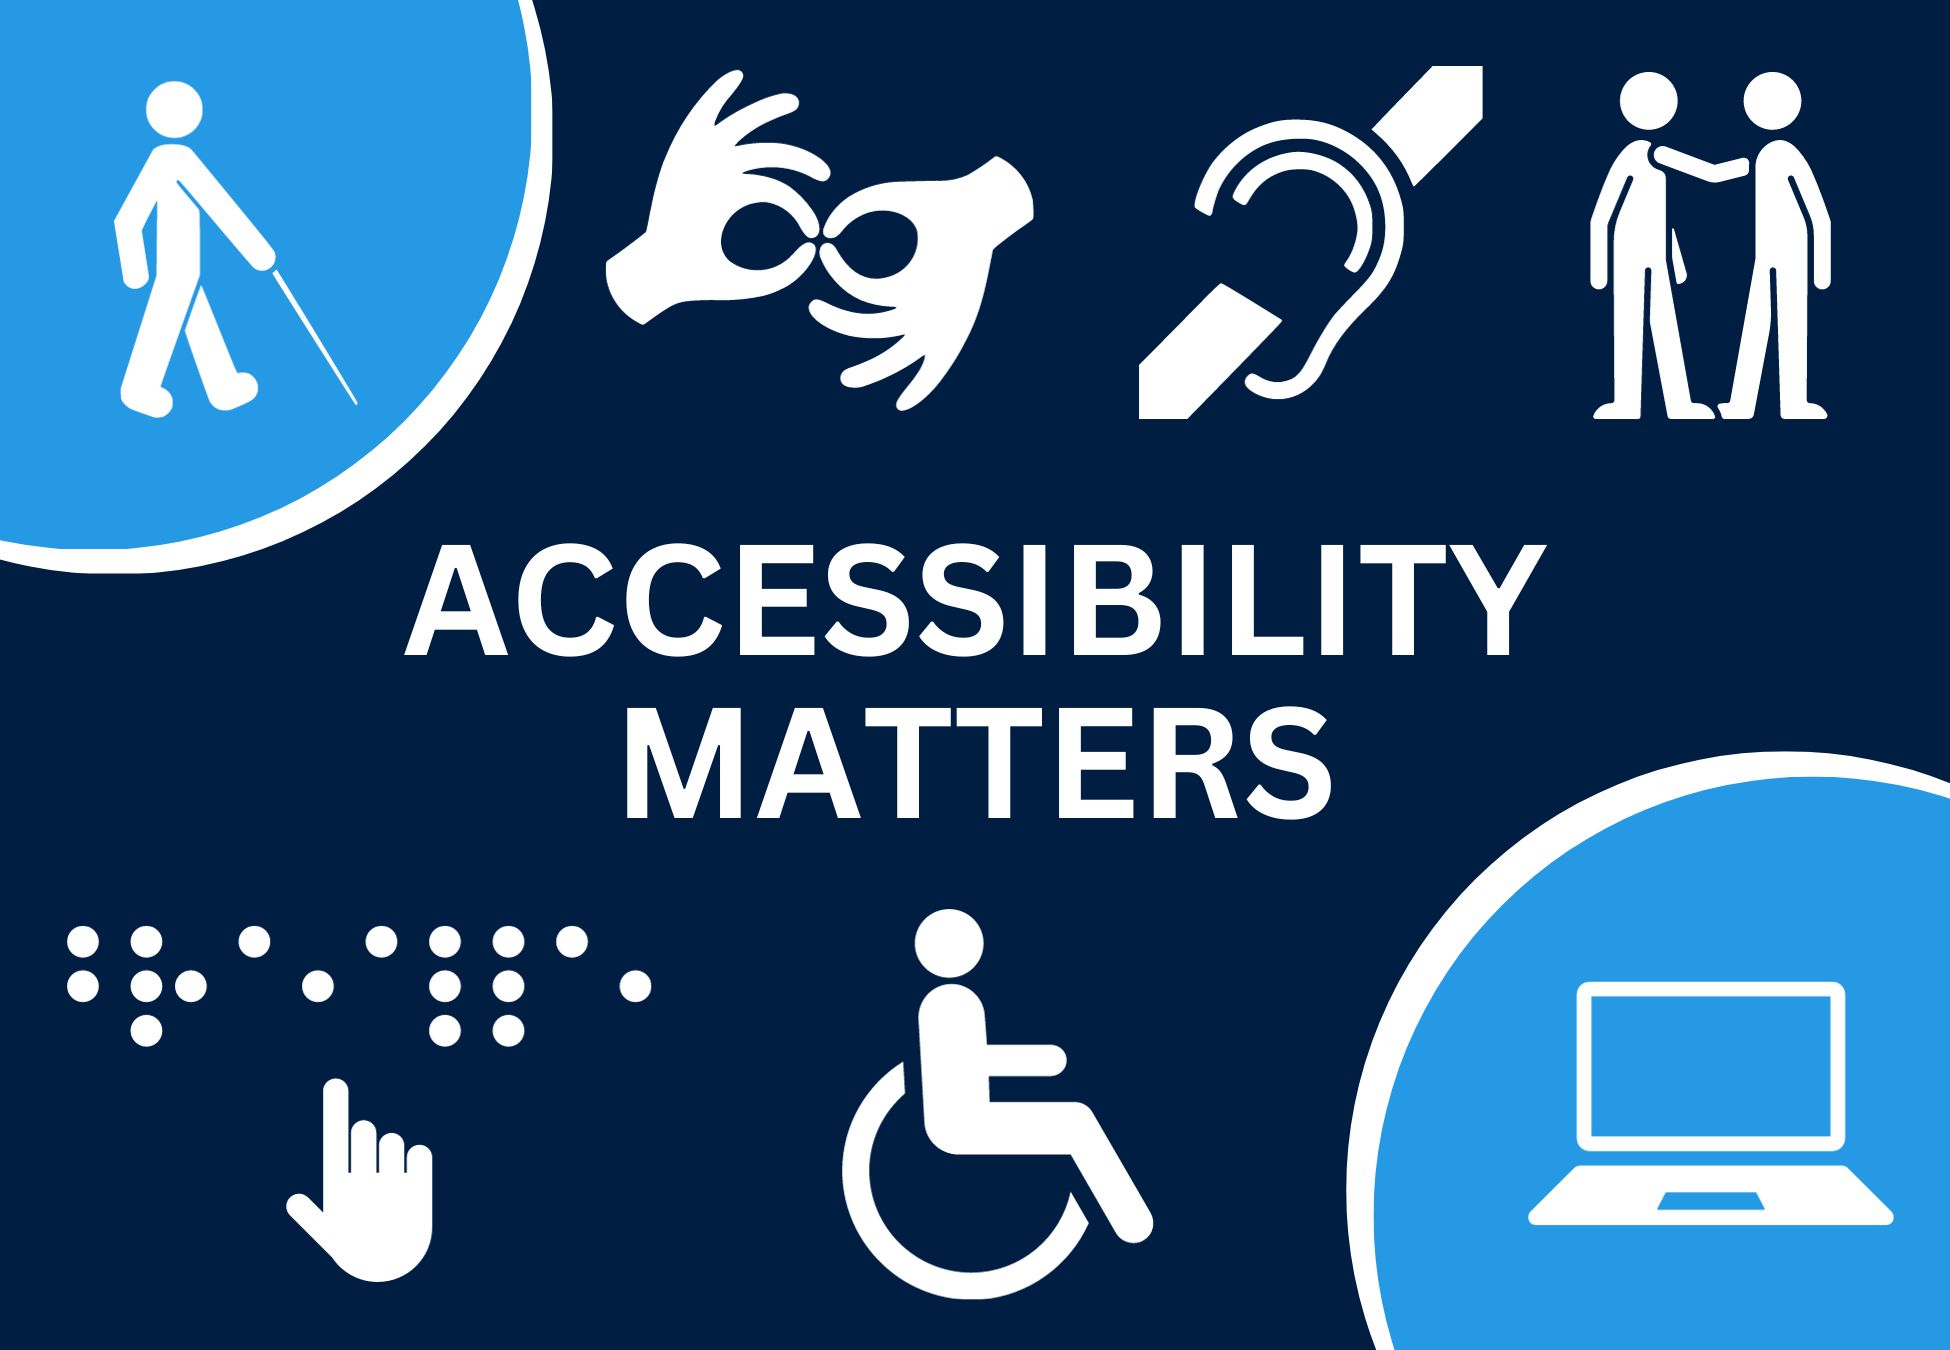 Symbols of accessibility such as someone using a white cane, a laptop, and braille with the words "Accessibility Matters"